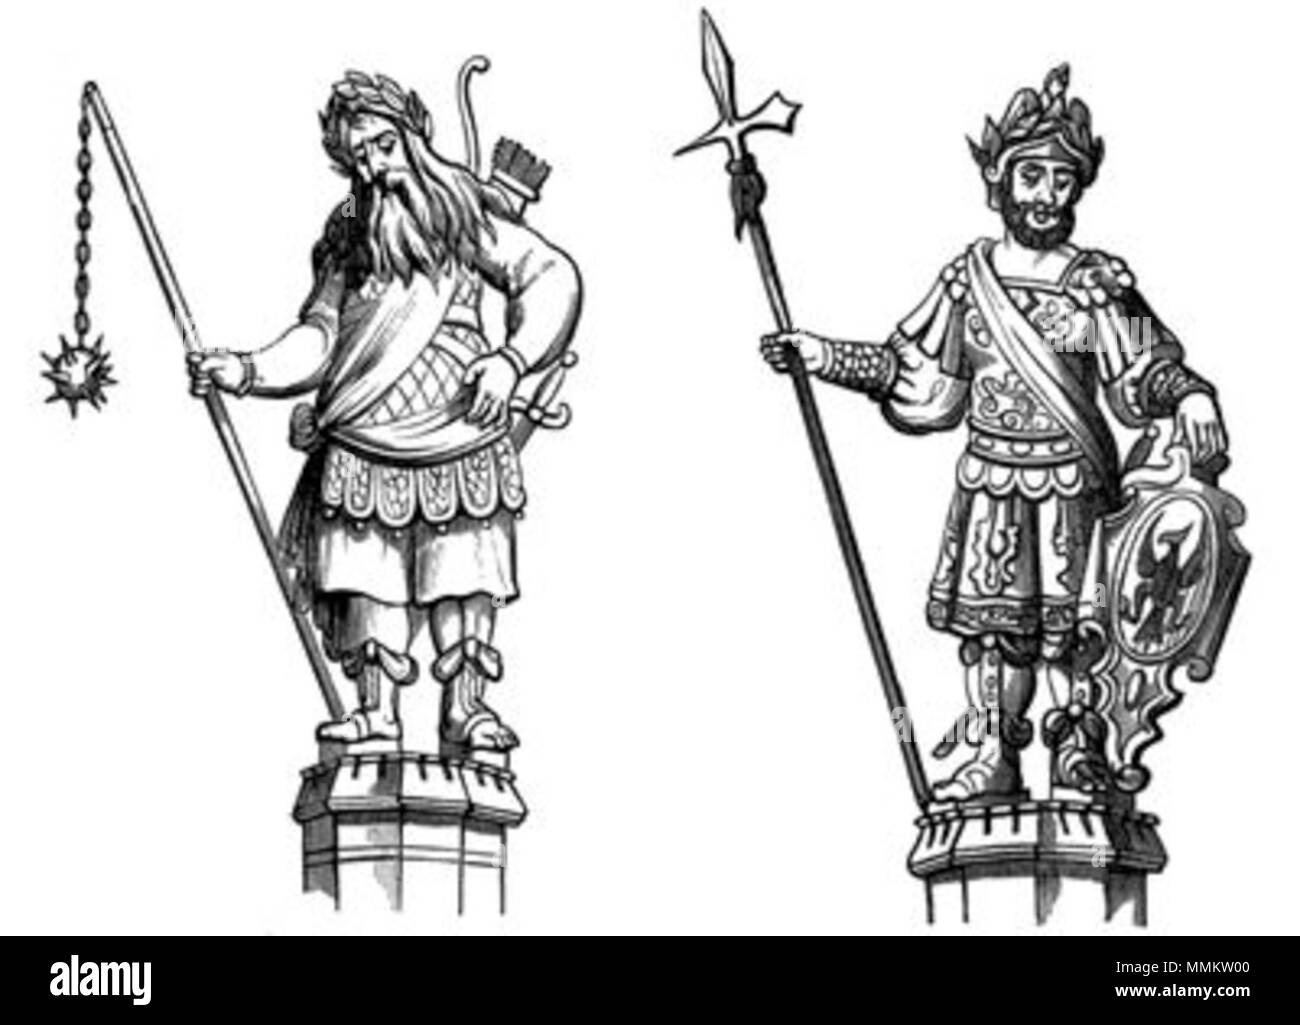 . English: Gog and Magog. The Giants in the Guildhall of London  . 27 January 2012, 14:18:35. Frederick William Fairholt (1814 – 3 April 1866) Gog and Magog Stock Photo